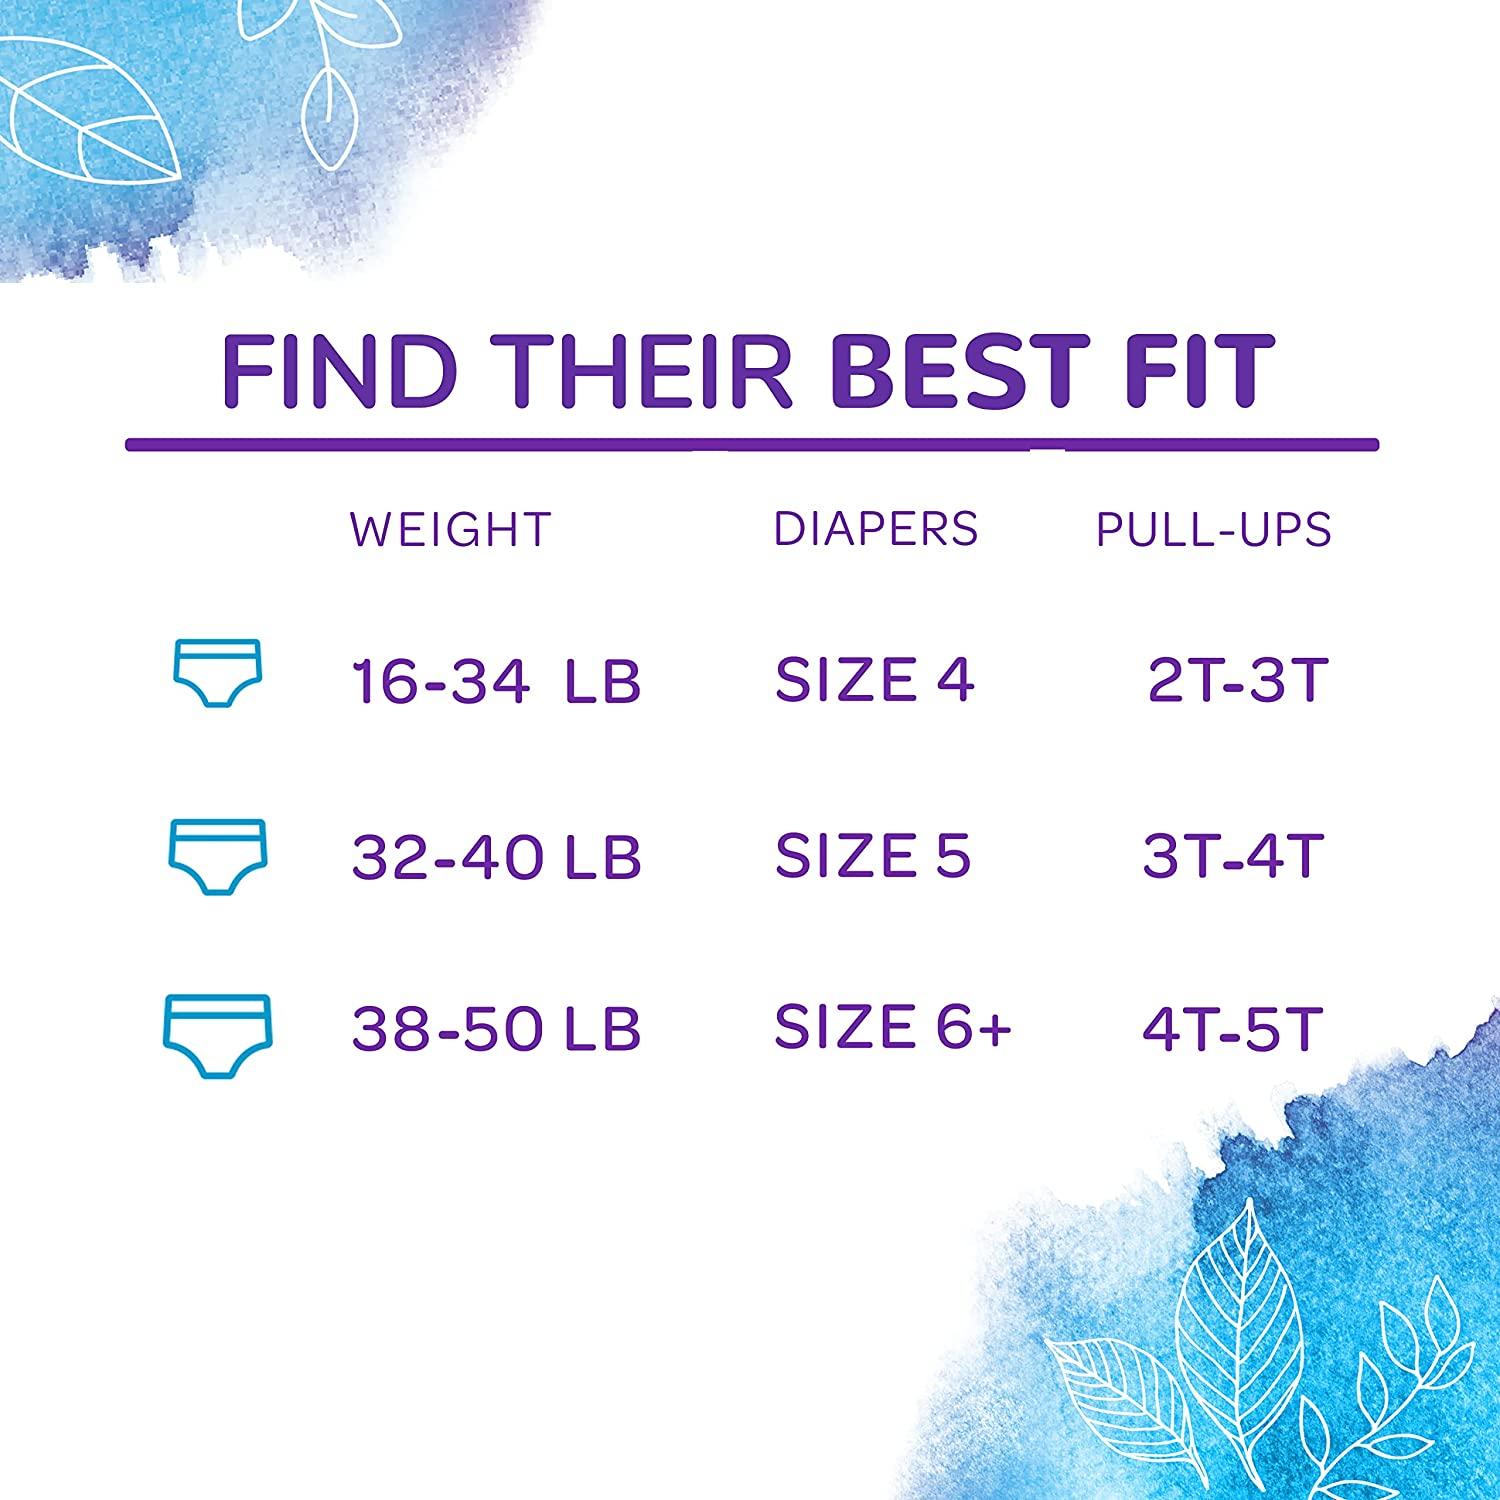 Pampers Potty Training Underwear for Toddlers, Easy Ups Diapers, Training  Pants for Girls and Boys, Size 4 (2T-3T), 112 Count, Giant Pack :  : Baby